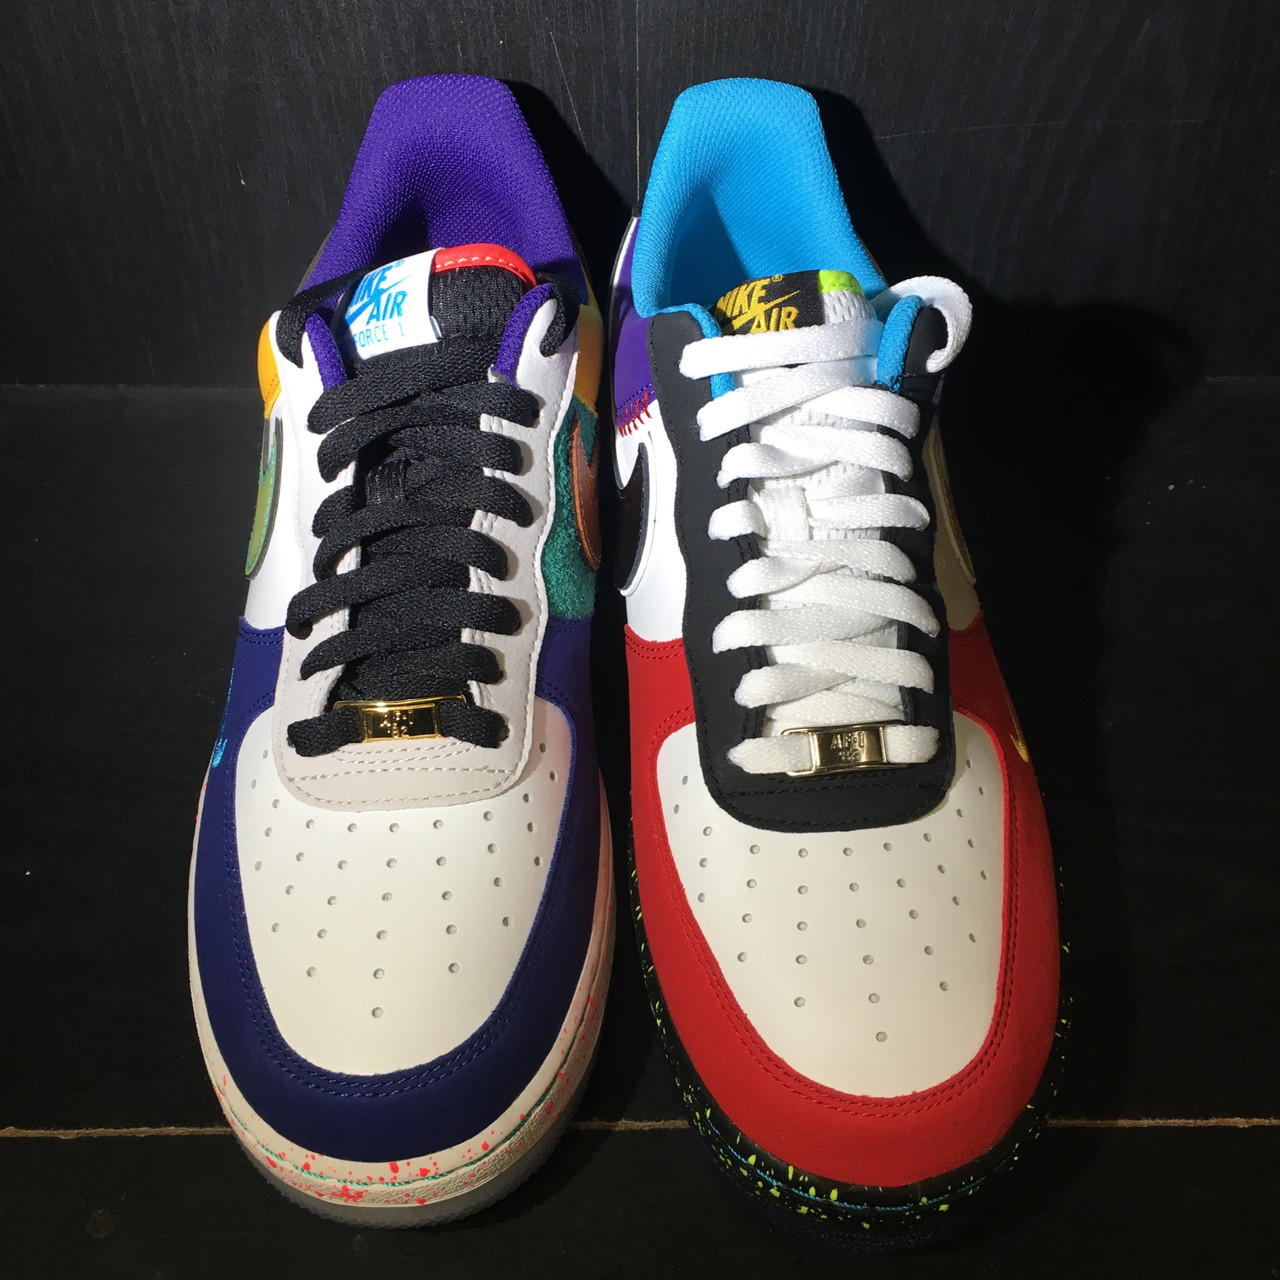 Nike Air Force 1 07 LV8 'What The La' Shoes - Size 12